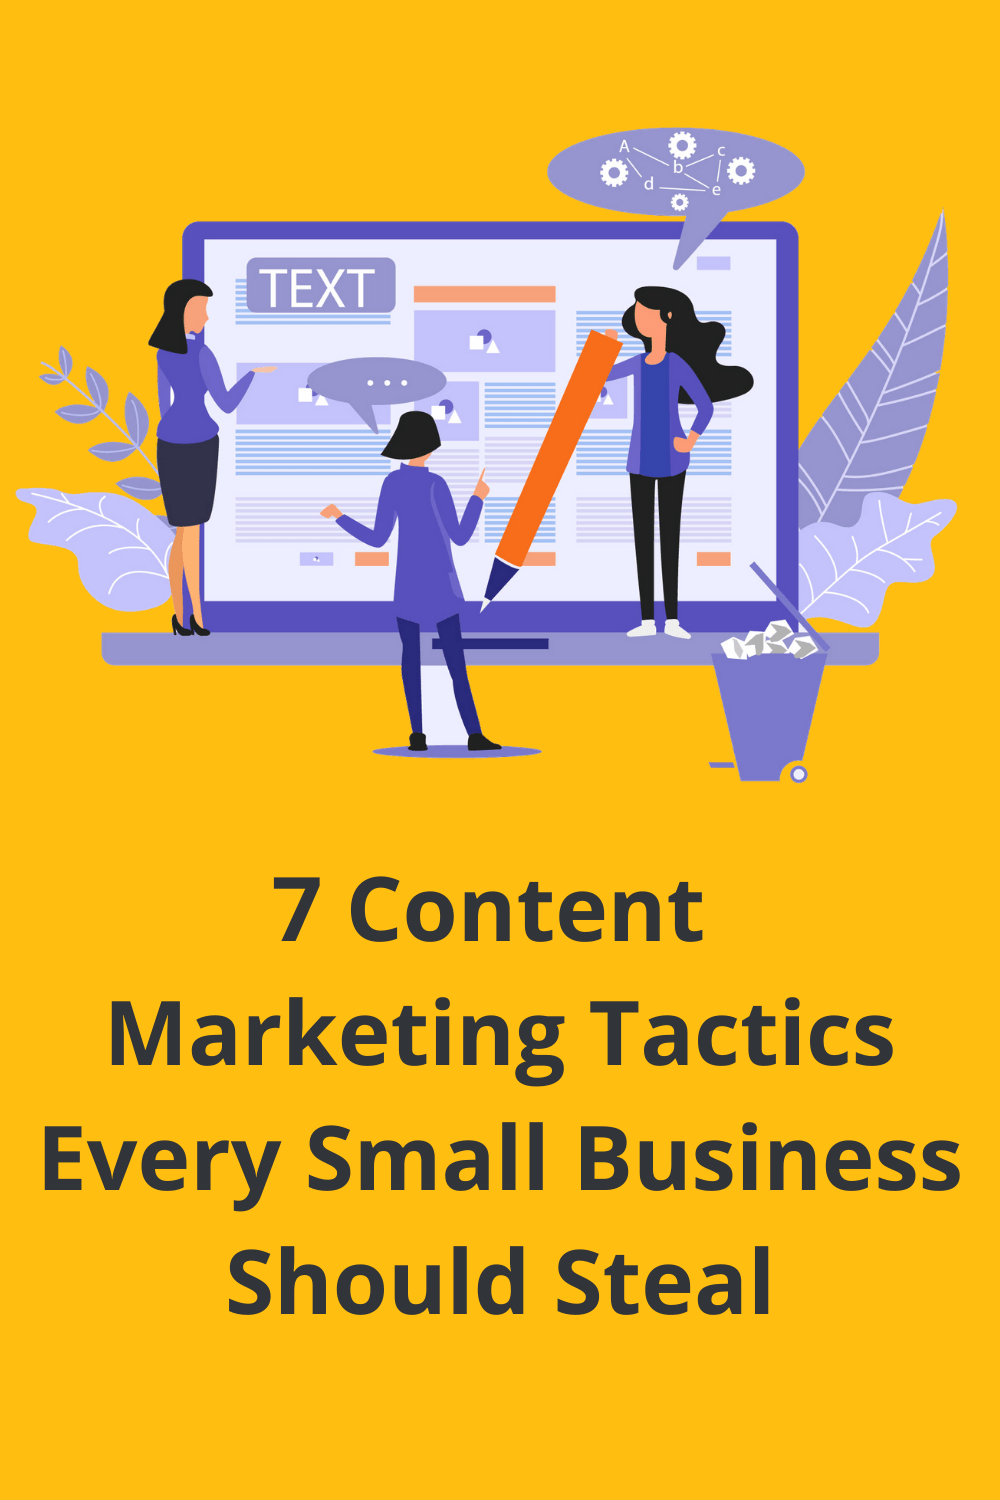 It’s not enough to create content. You need compelling content that serves a purpose and drive engagement with your followers if you want your business to thrive. via @scopedesign